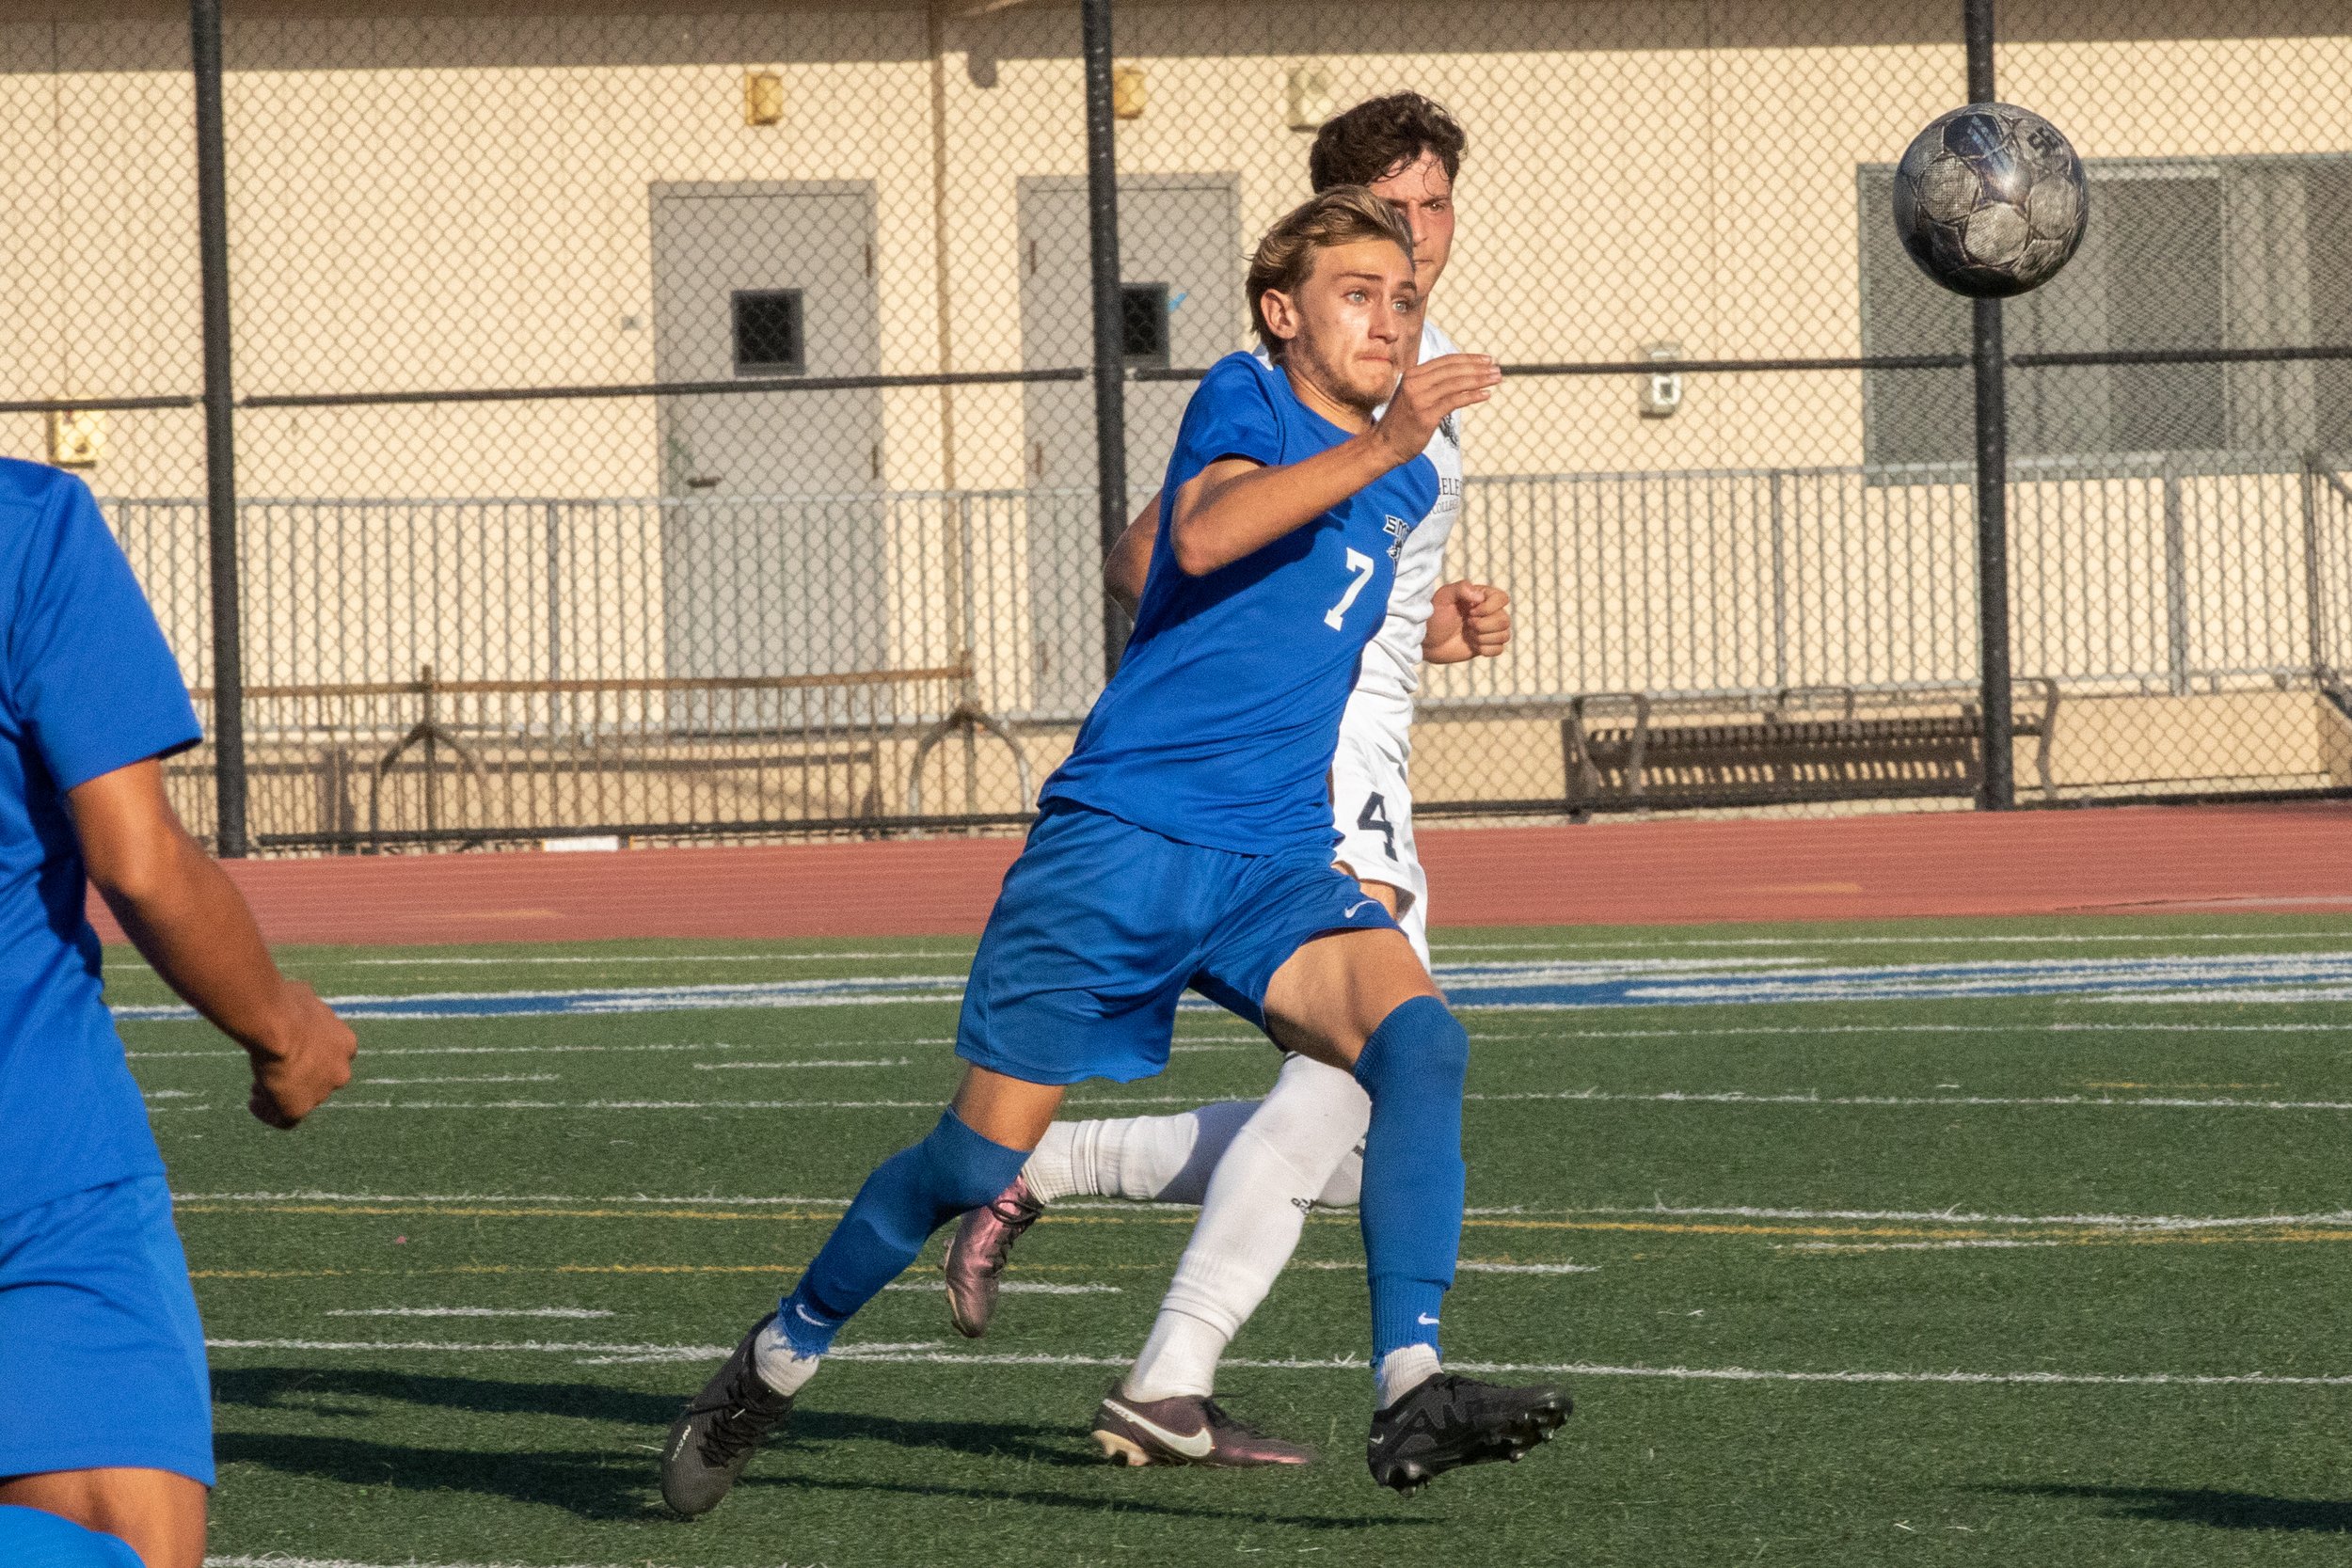  Santa Monica Corsairs' forward Darren Lewis (7) runs after the ball, followed closely by Eagle defender Brandon Navarrete (4) on Friday, Oct. 13, 2023 at Corsair Field in Santa Monica, Calif. Los Angeles during the men's soccer match against the Los